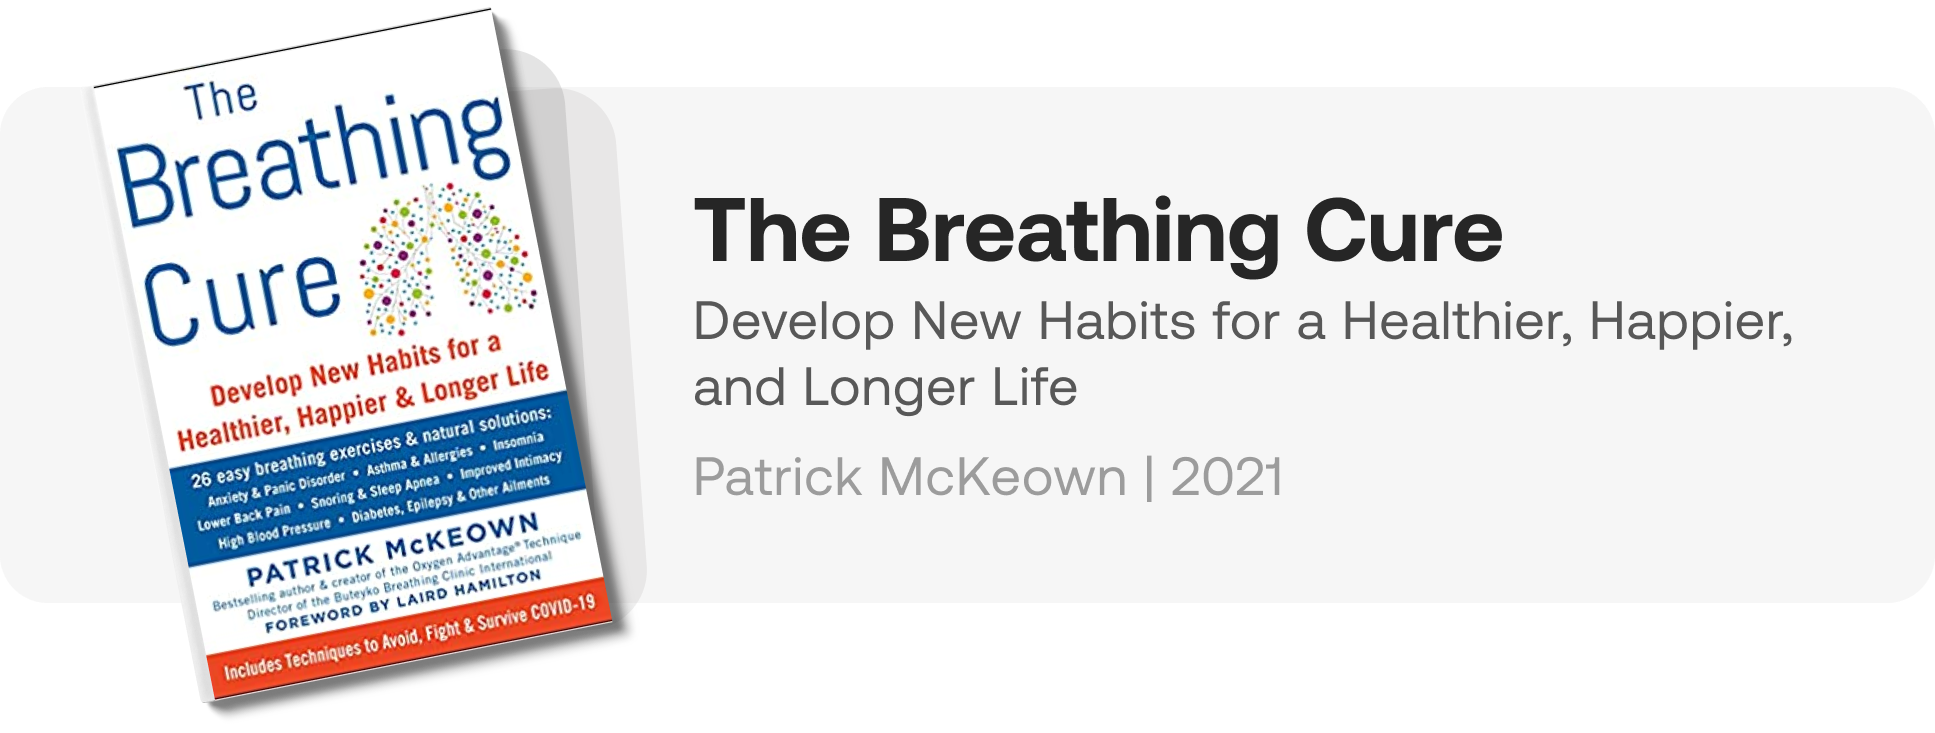 The Breathing Cure Book Cover Patrick McKeown